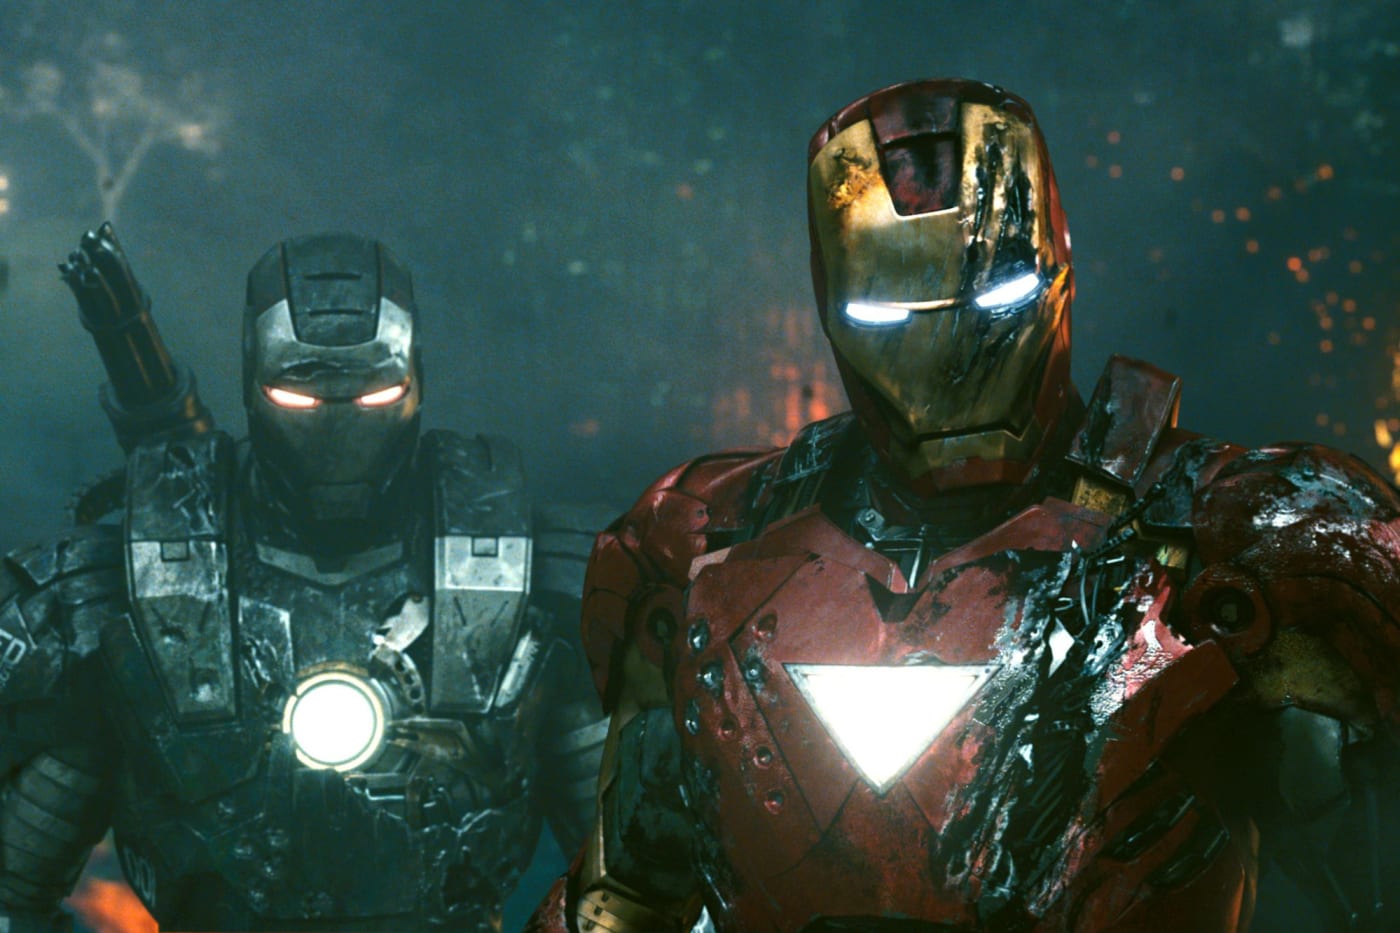 Iron Man 20 201 Trivia Facts & Easter Eggs to Catch on Disney+ ...